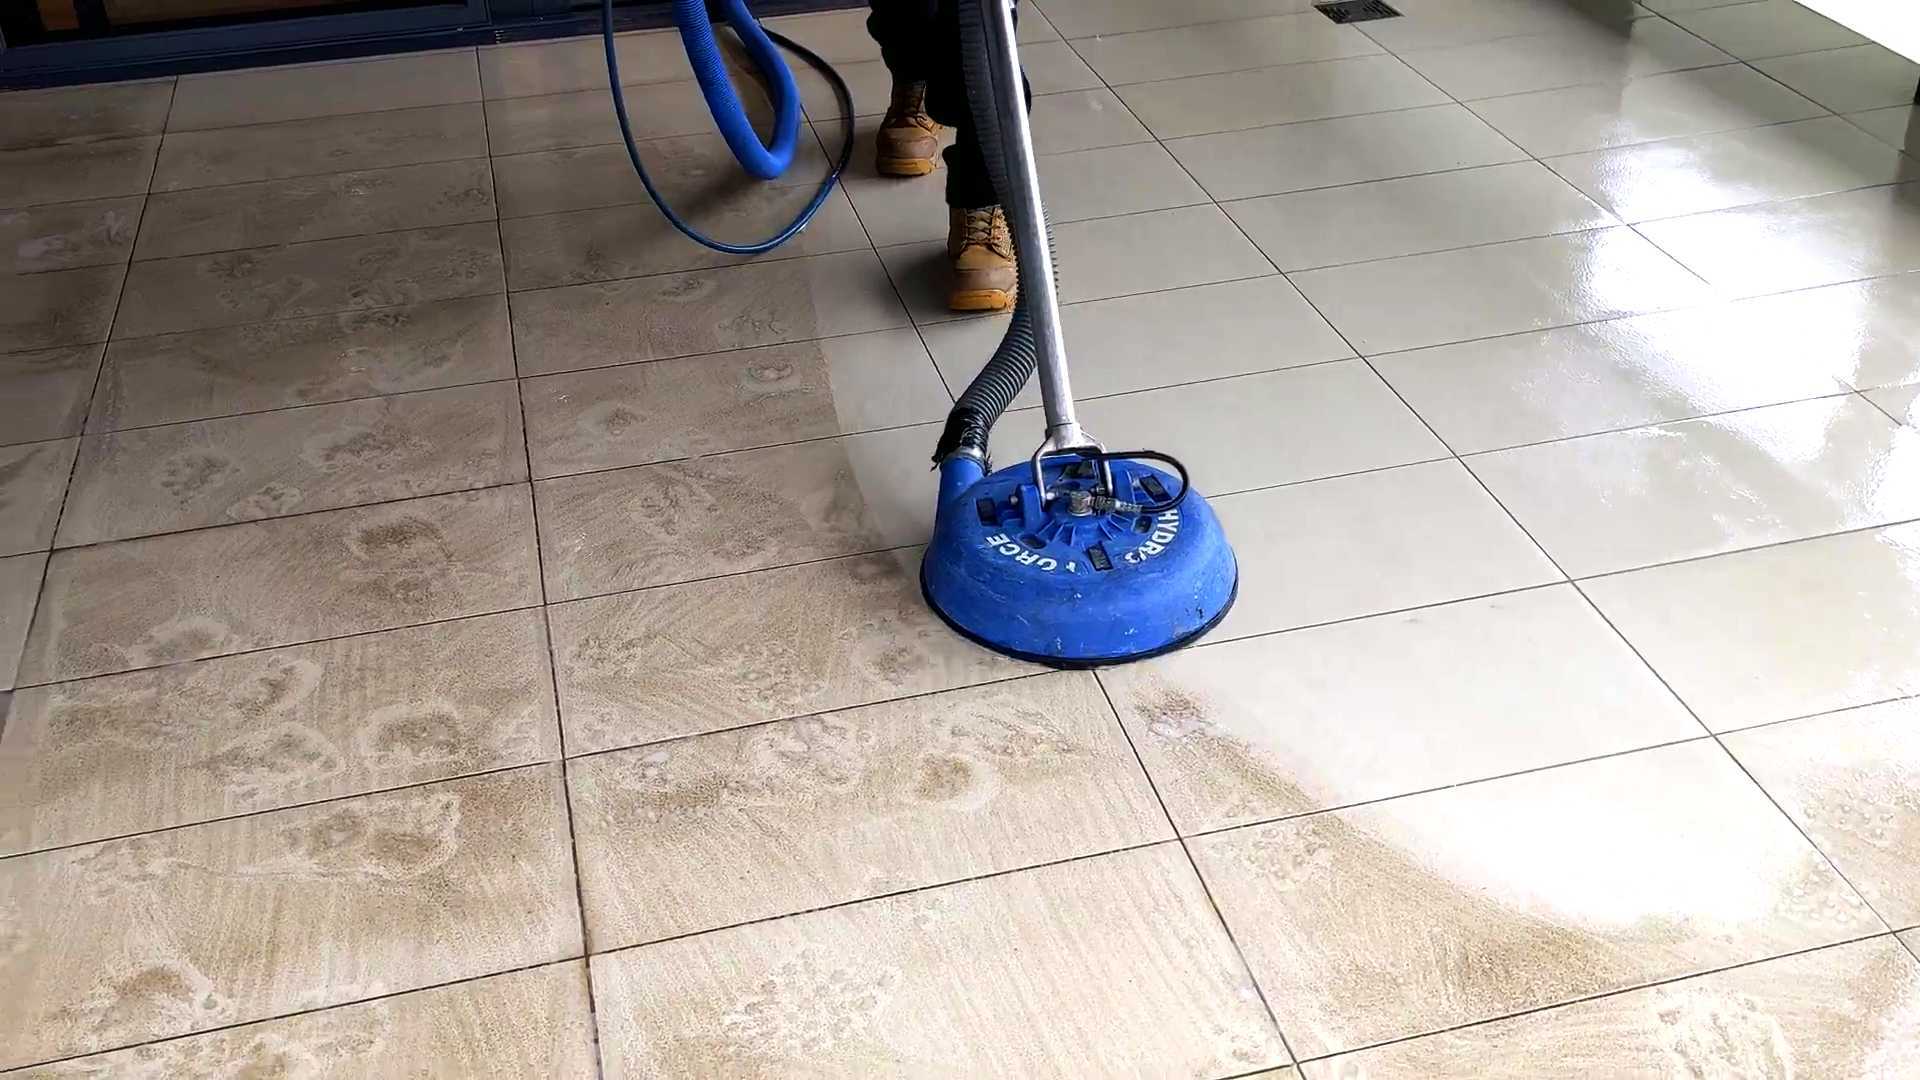 https://www.sparklingcleancarpetcare.com/wp-content/uploads/2022/12/Tile-and-grout-cleaning-Melbourne-.jpg